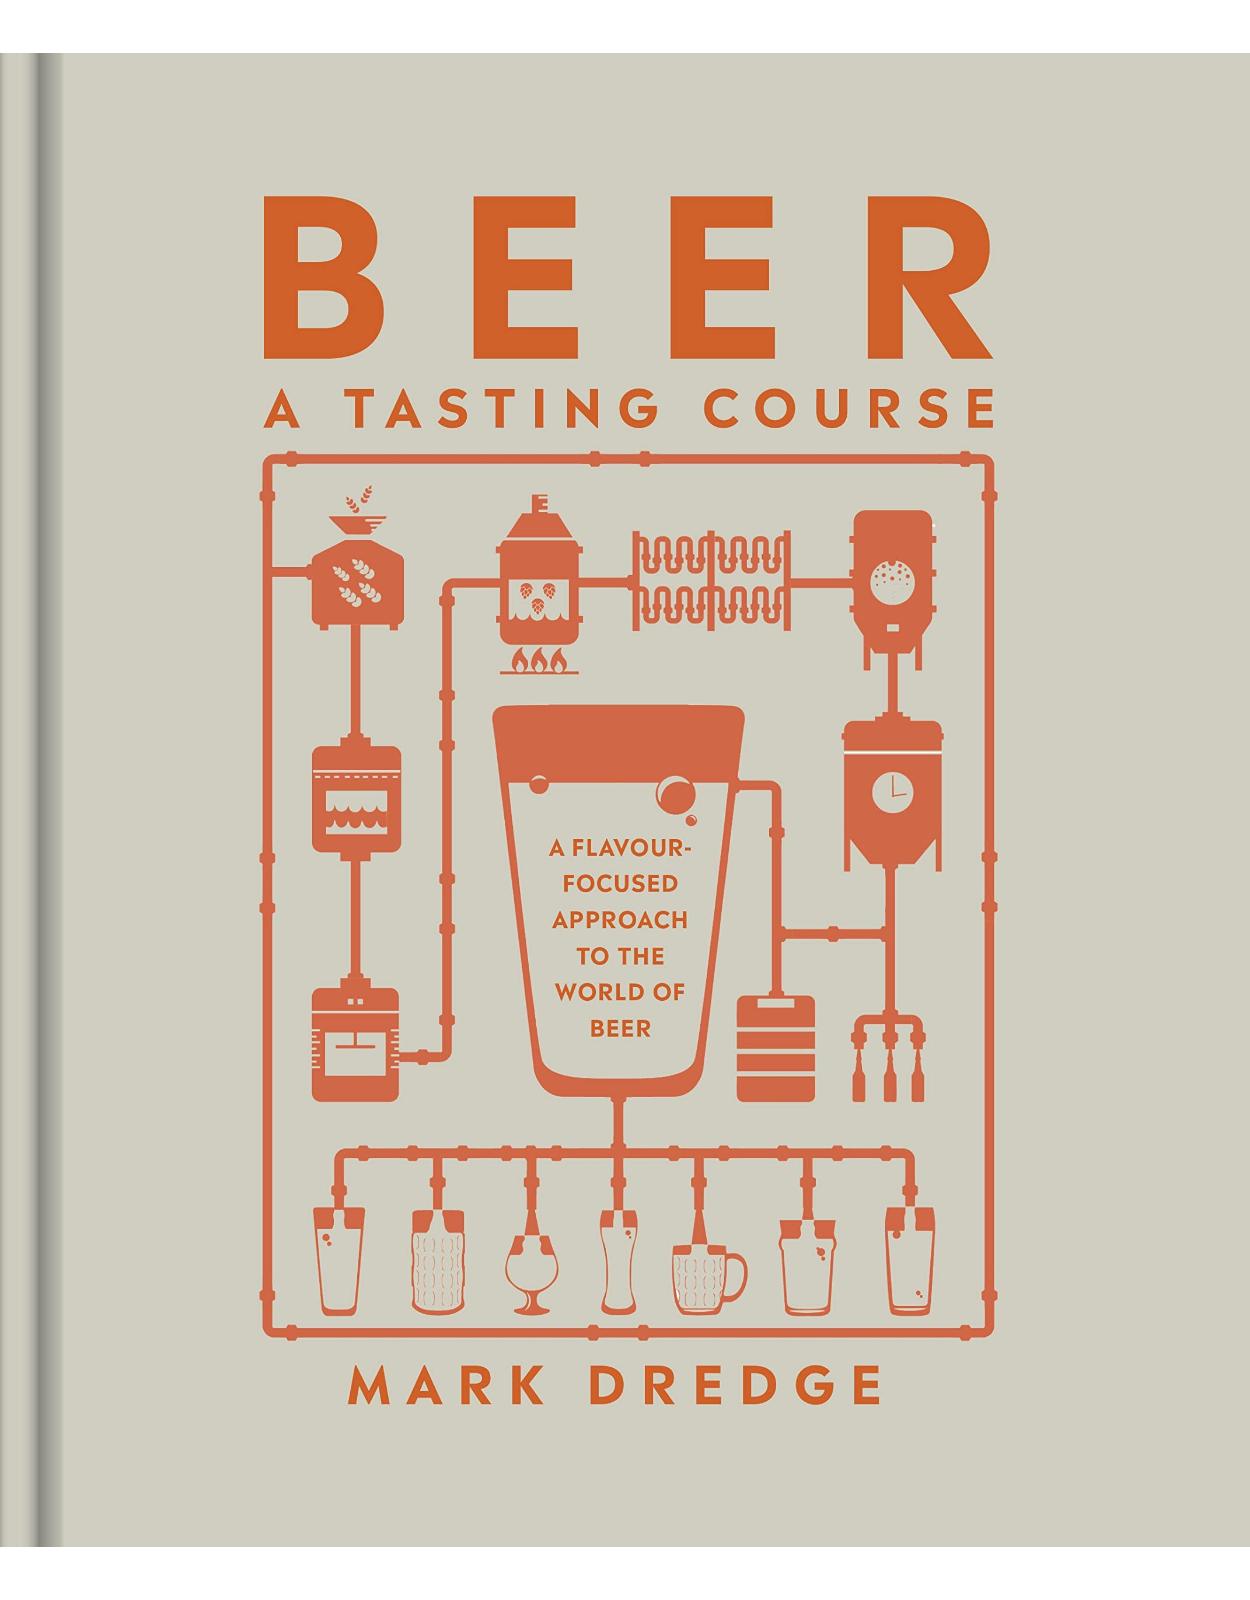 Beer A Tasting Course: A Flavour-Focused Approach to the World of Beer